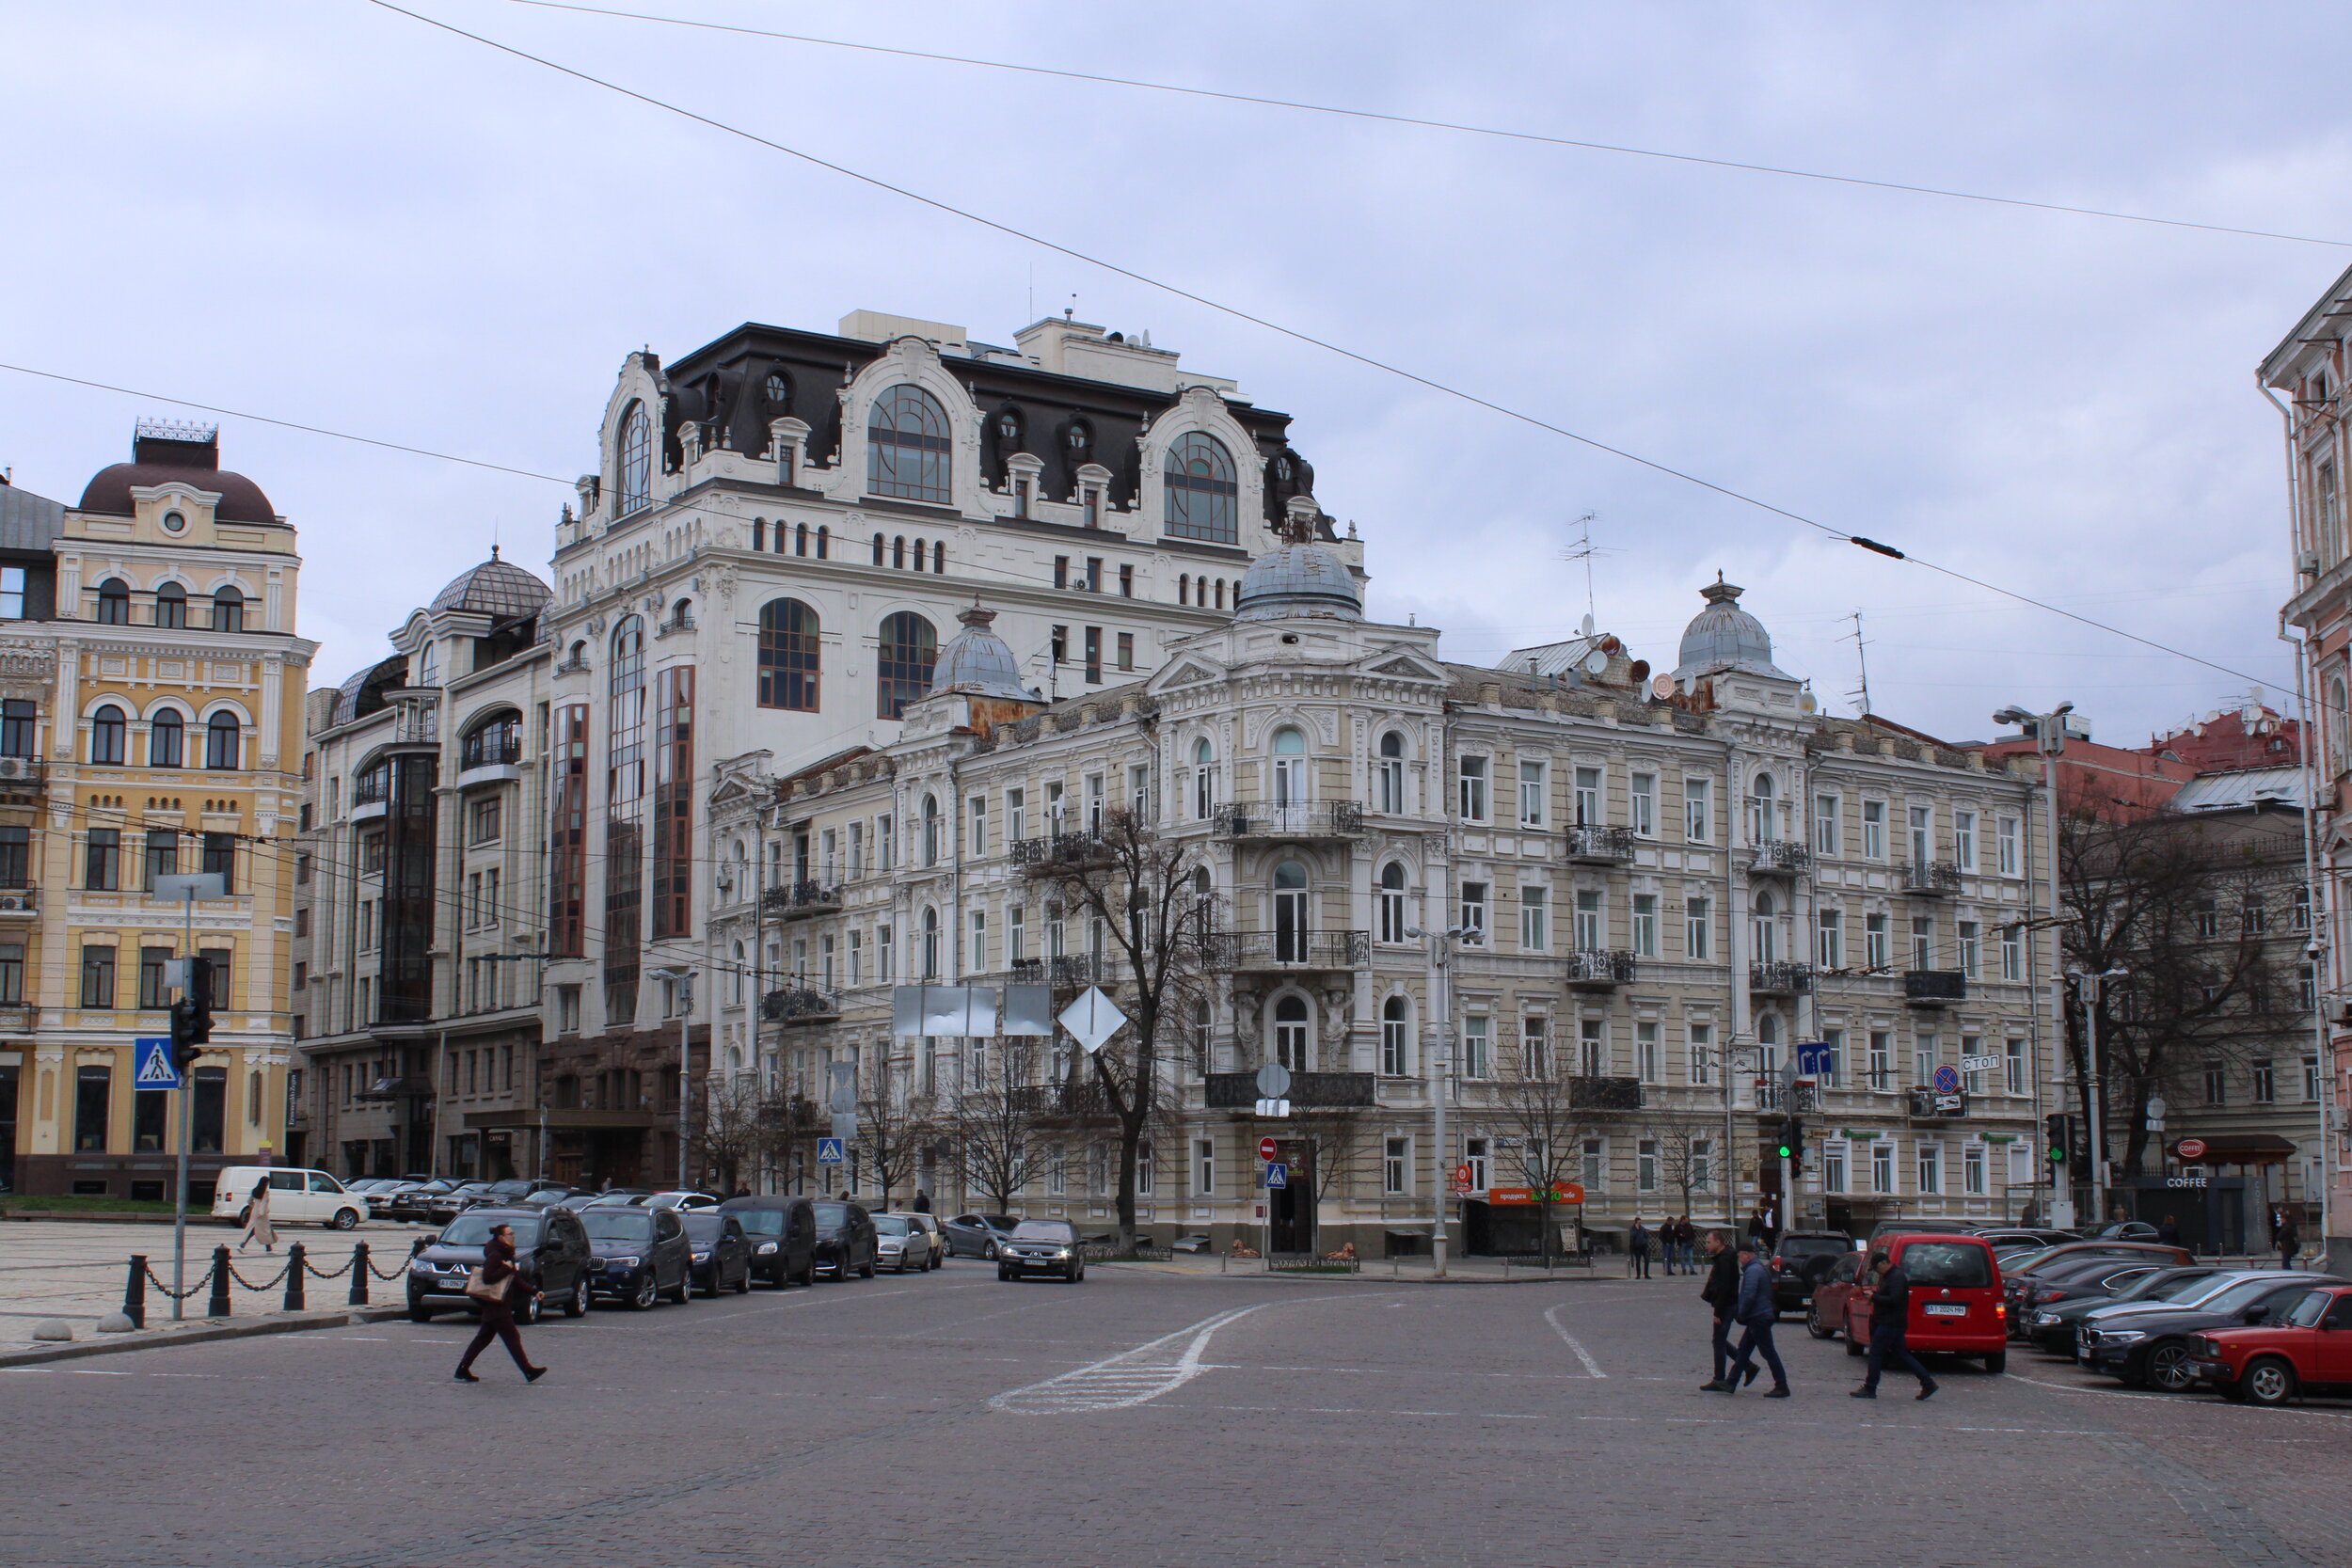   KYIV, Ukraine. April 21st. PICTURED:  The various facades and street corners containing the city’s architectural wealth. 